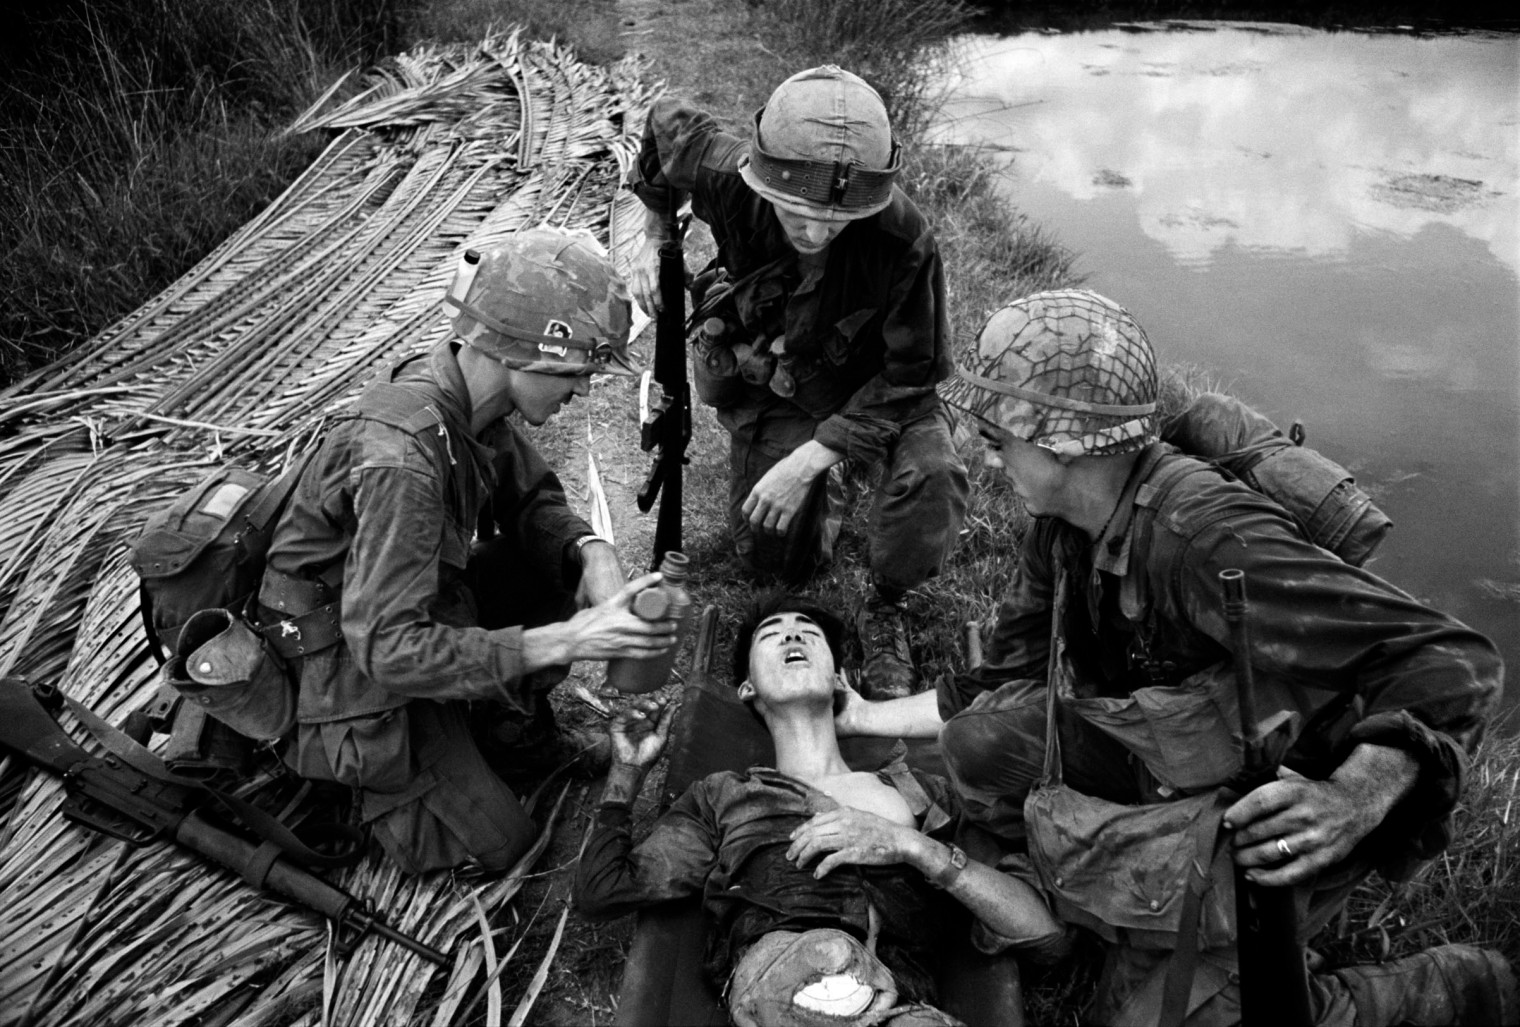 The Vietnam War Pictures That Moved Most